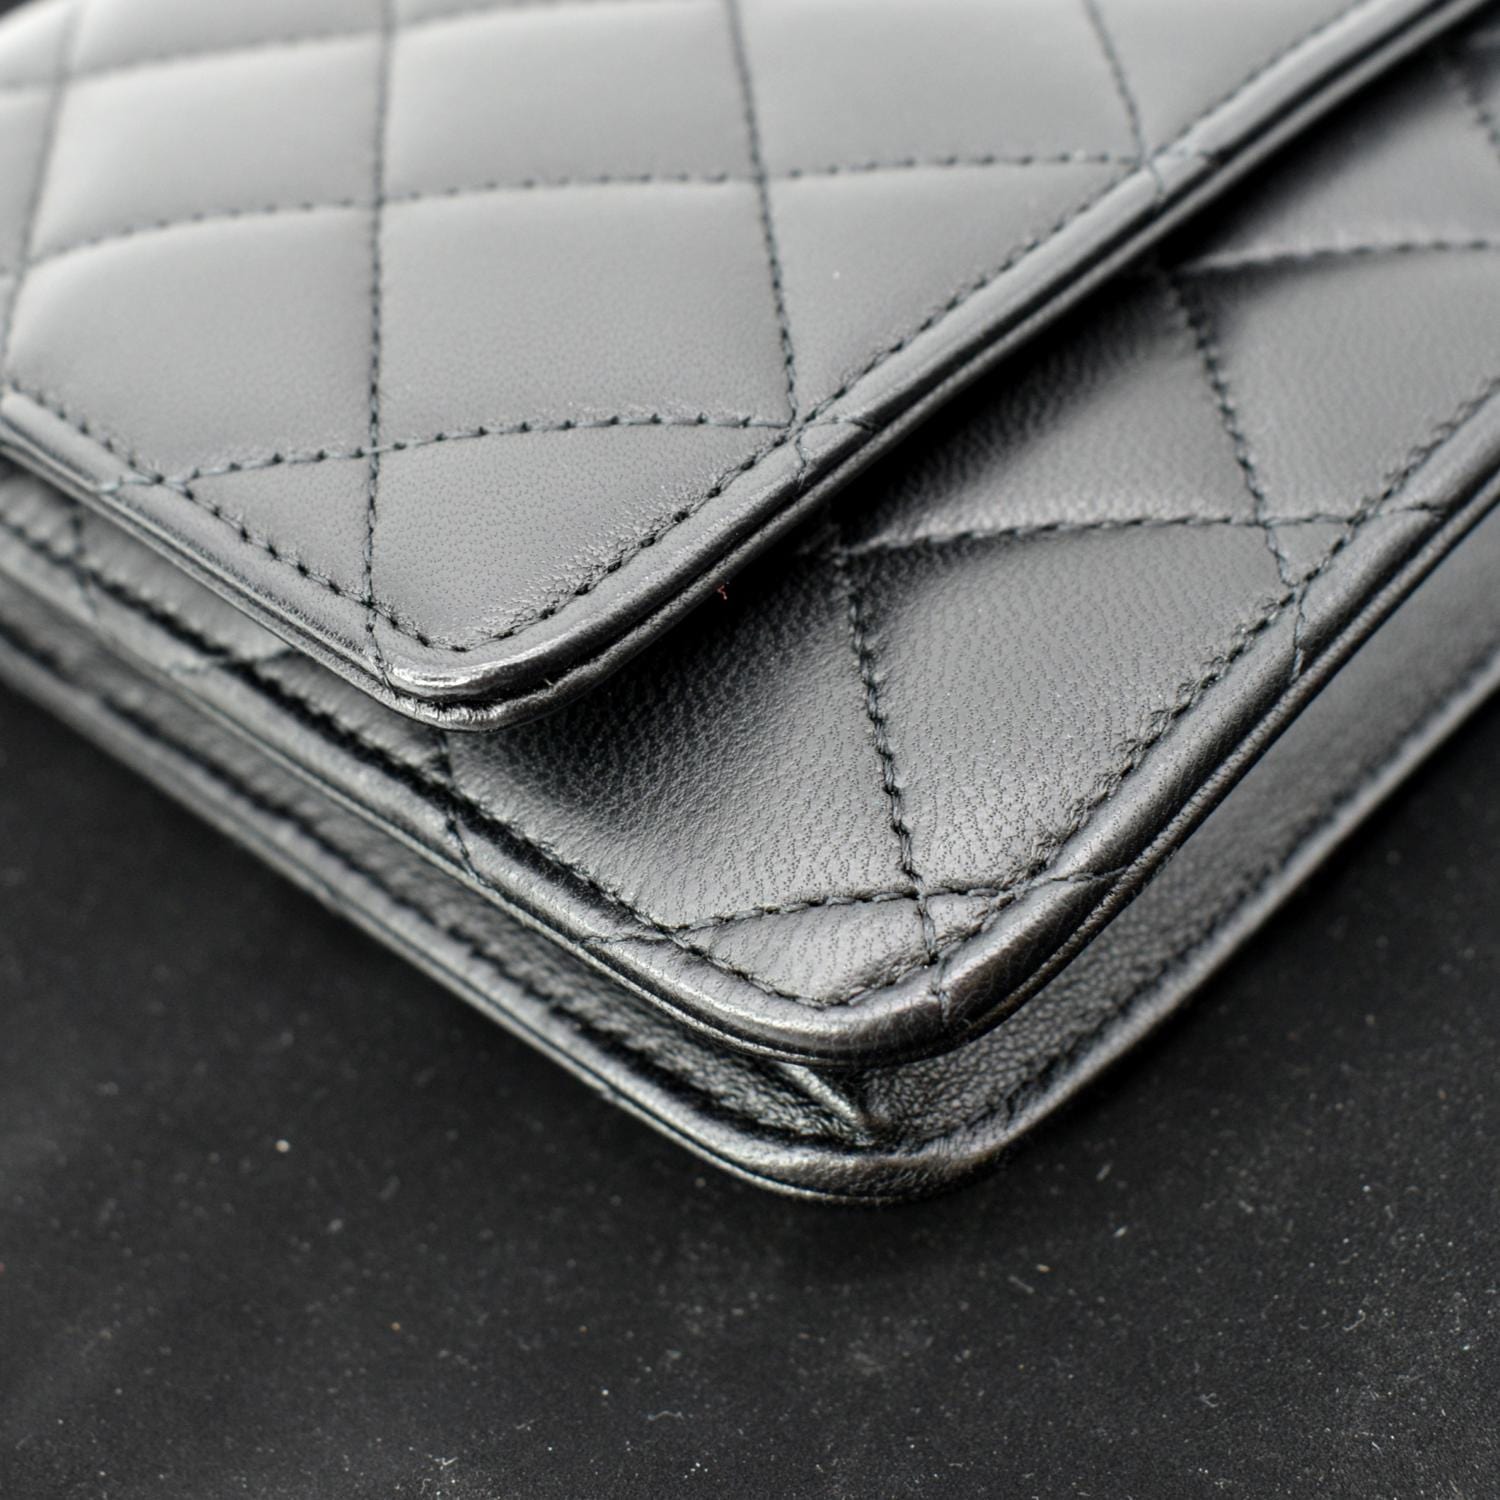 Black Lambskin Quilted Small Trendy W/GHW